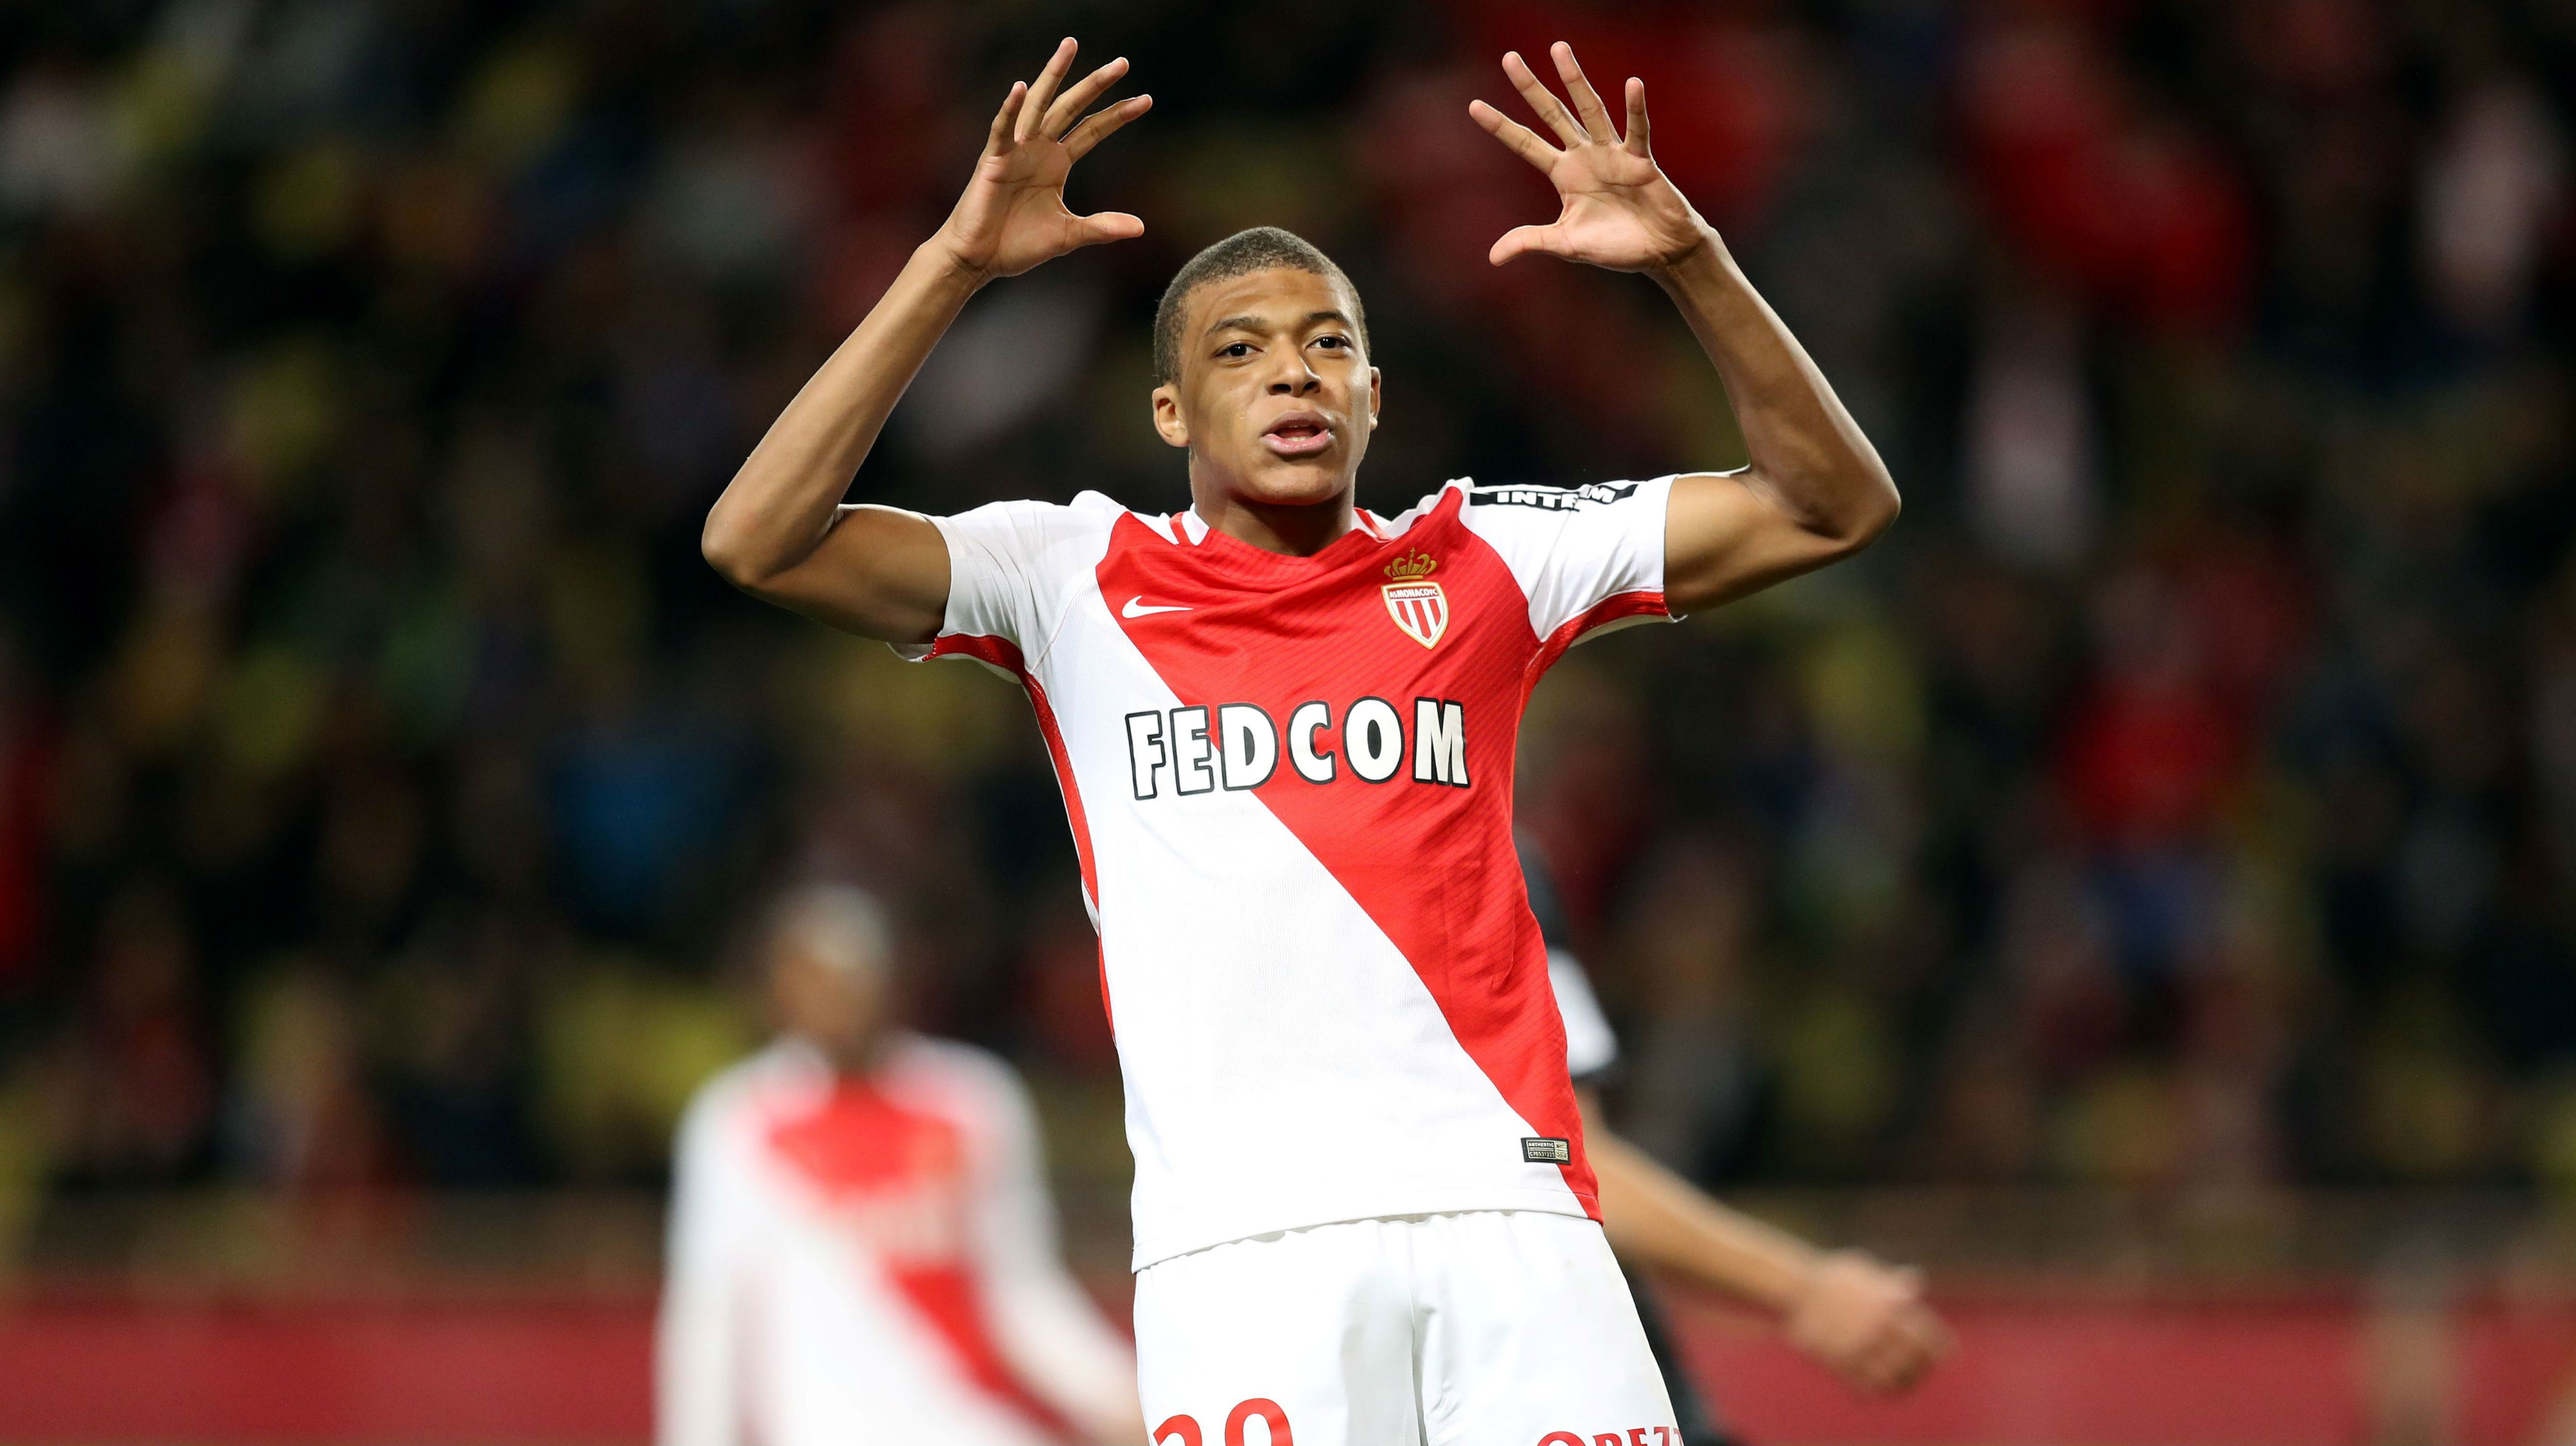 Monaco 'accuse Man City of tapping up Kylian Mbappe' - The Week UK